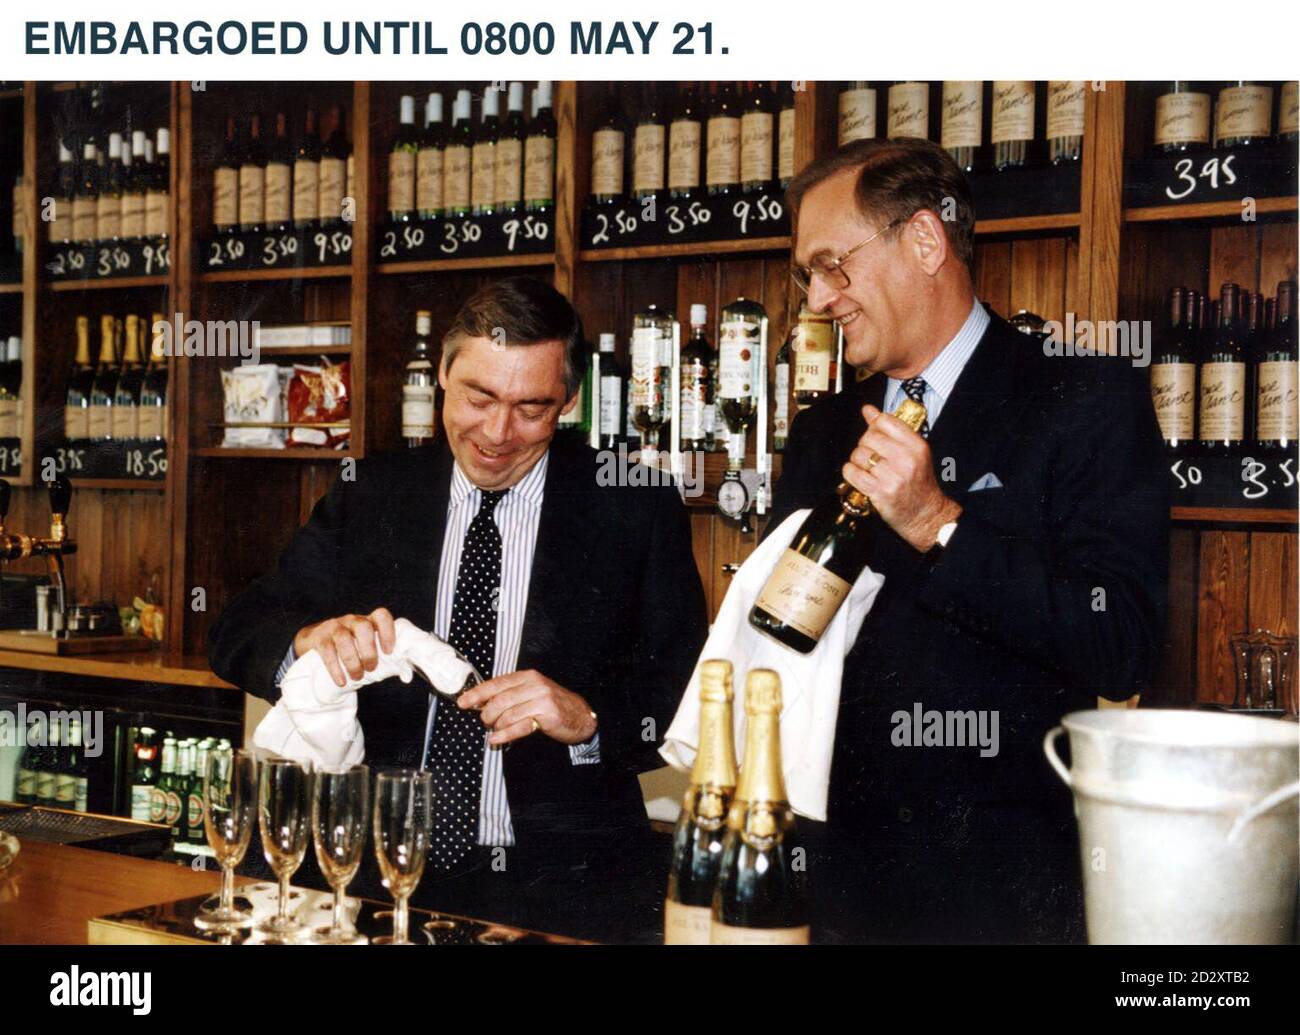 **EMBARGOED UNTIL 0800 MAY 21 1997** From left to right: Richard North, Finance Director of Bass PLC and Sir Ian Prosser, Chairman of Bass PLC.  The company will announce it's interim results on Wednesday May 21. PA Photo. Stock Photo